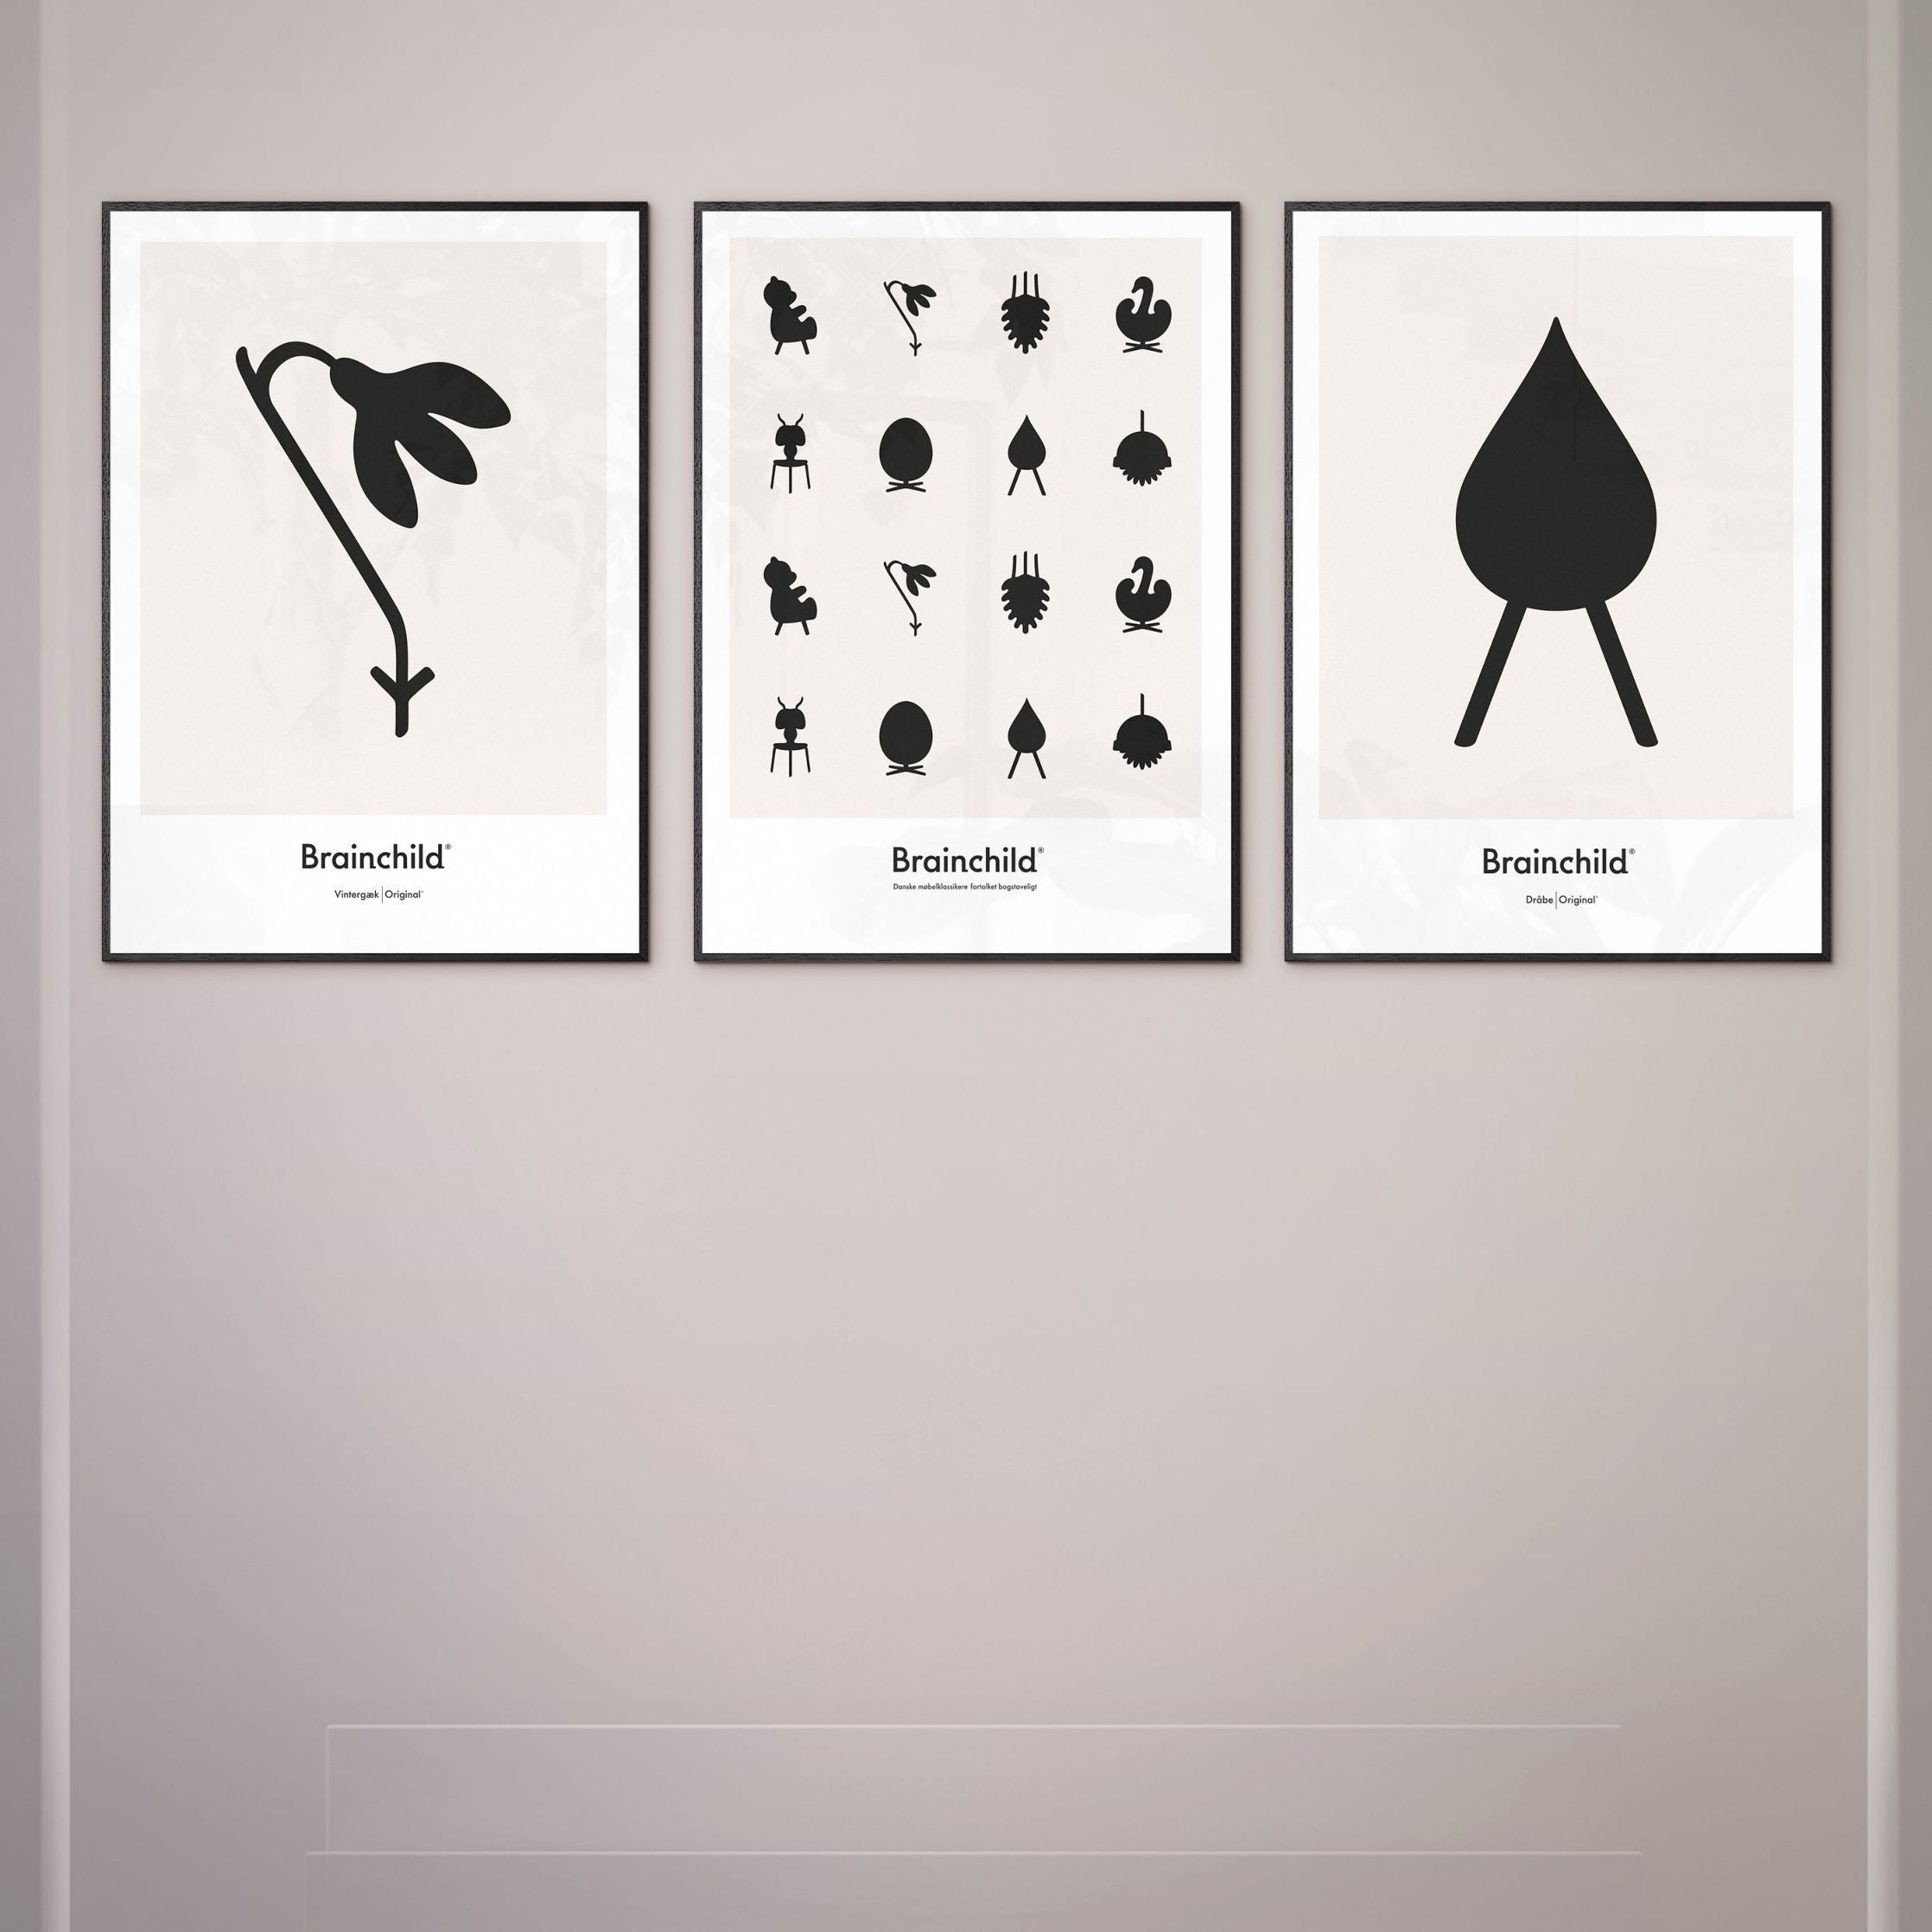 Brainchild Design Icon Poster, Frame Made Of Black Lacquered Wood 30x40 Cm, Grey